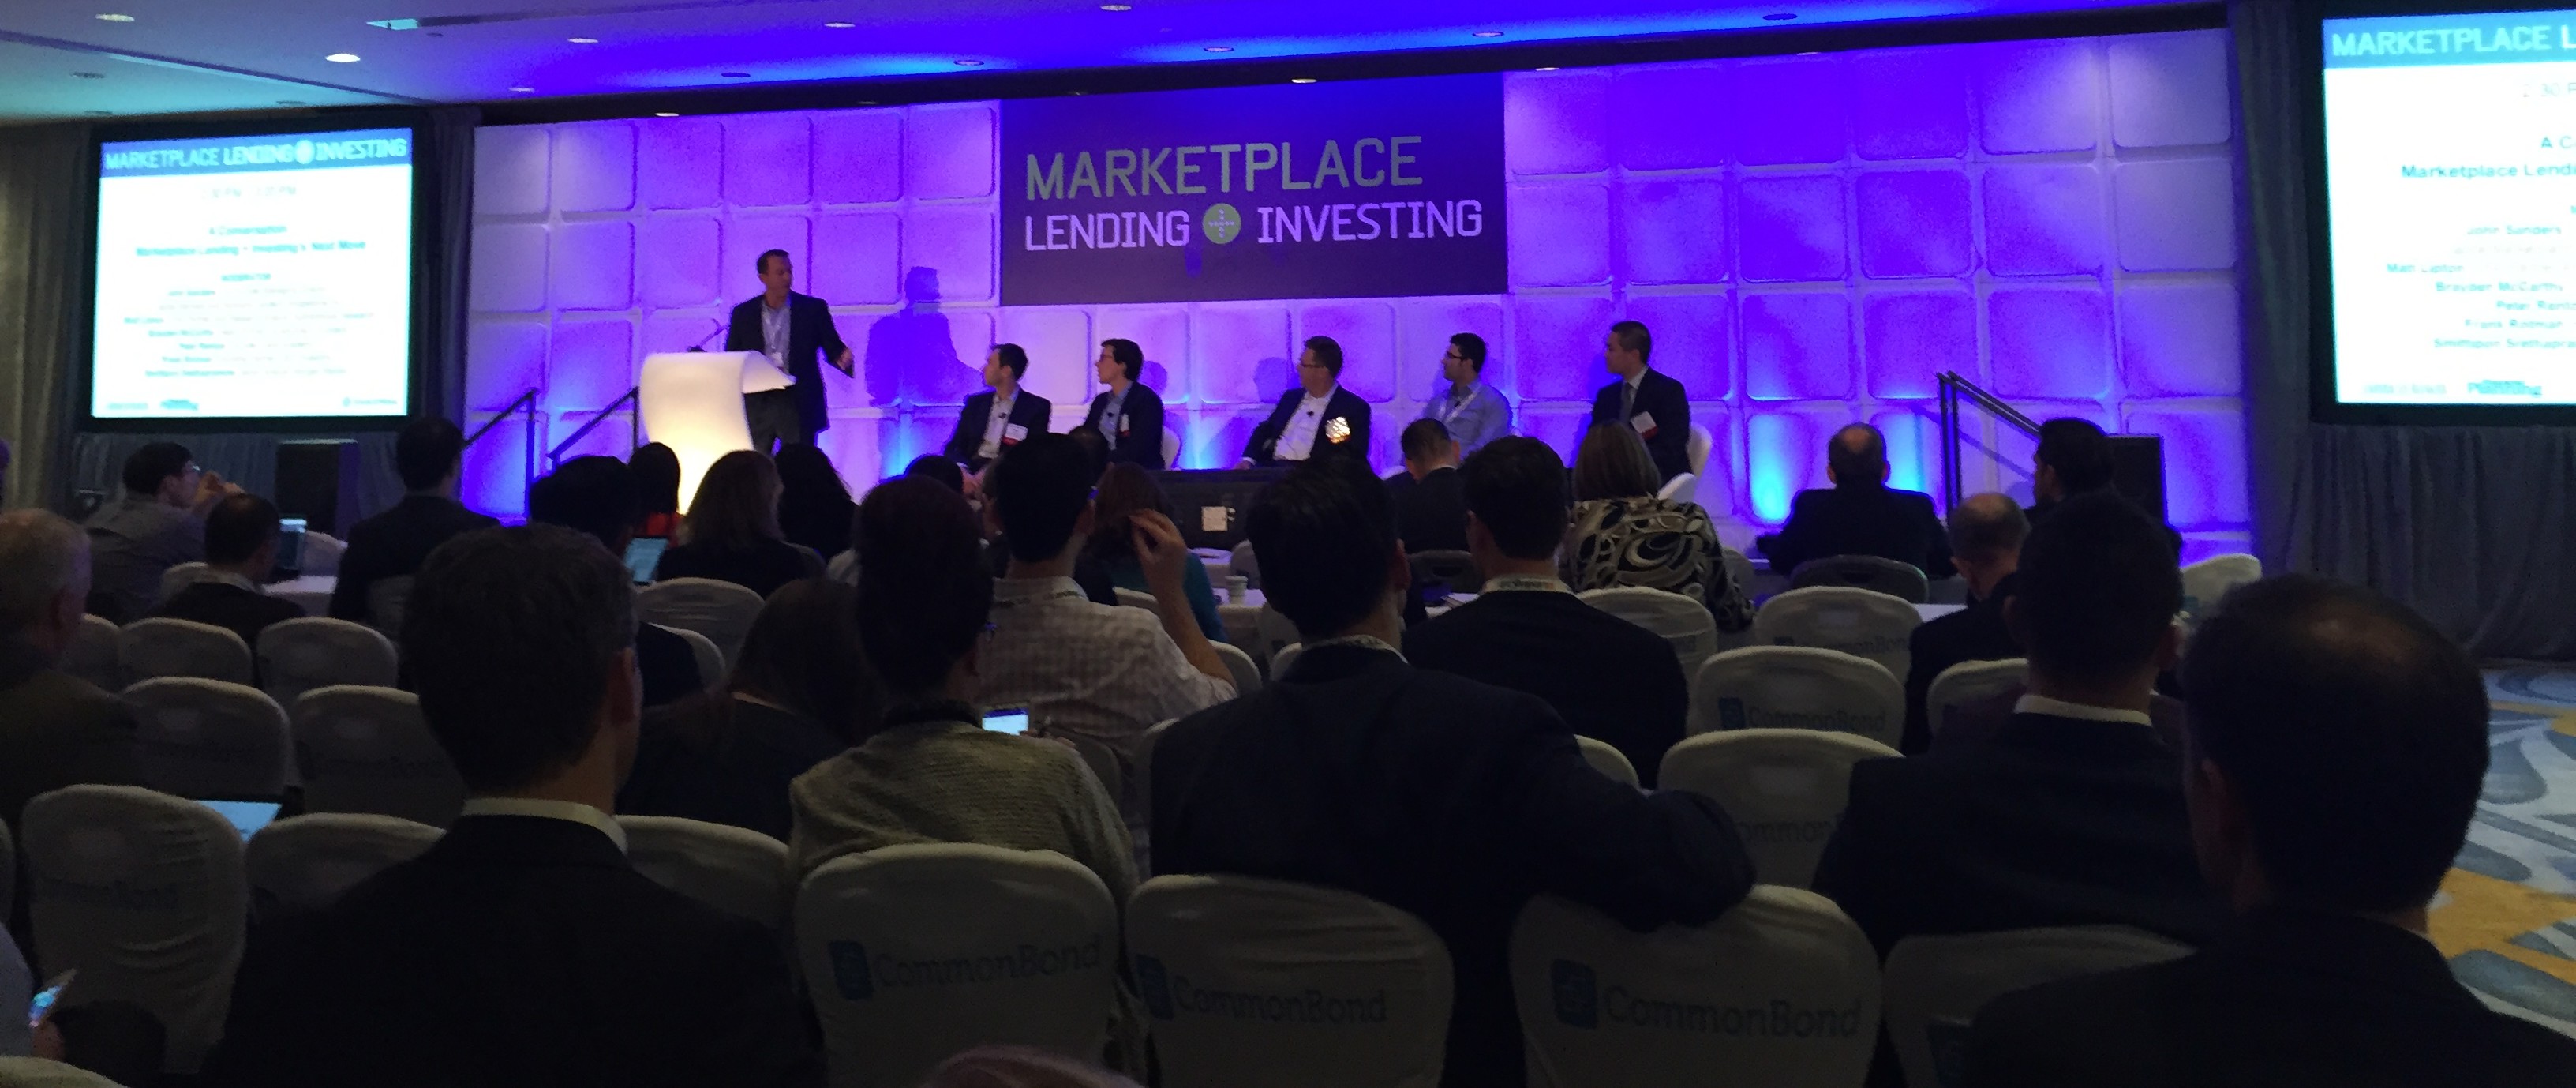 marketplace lending and investing source media new york